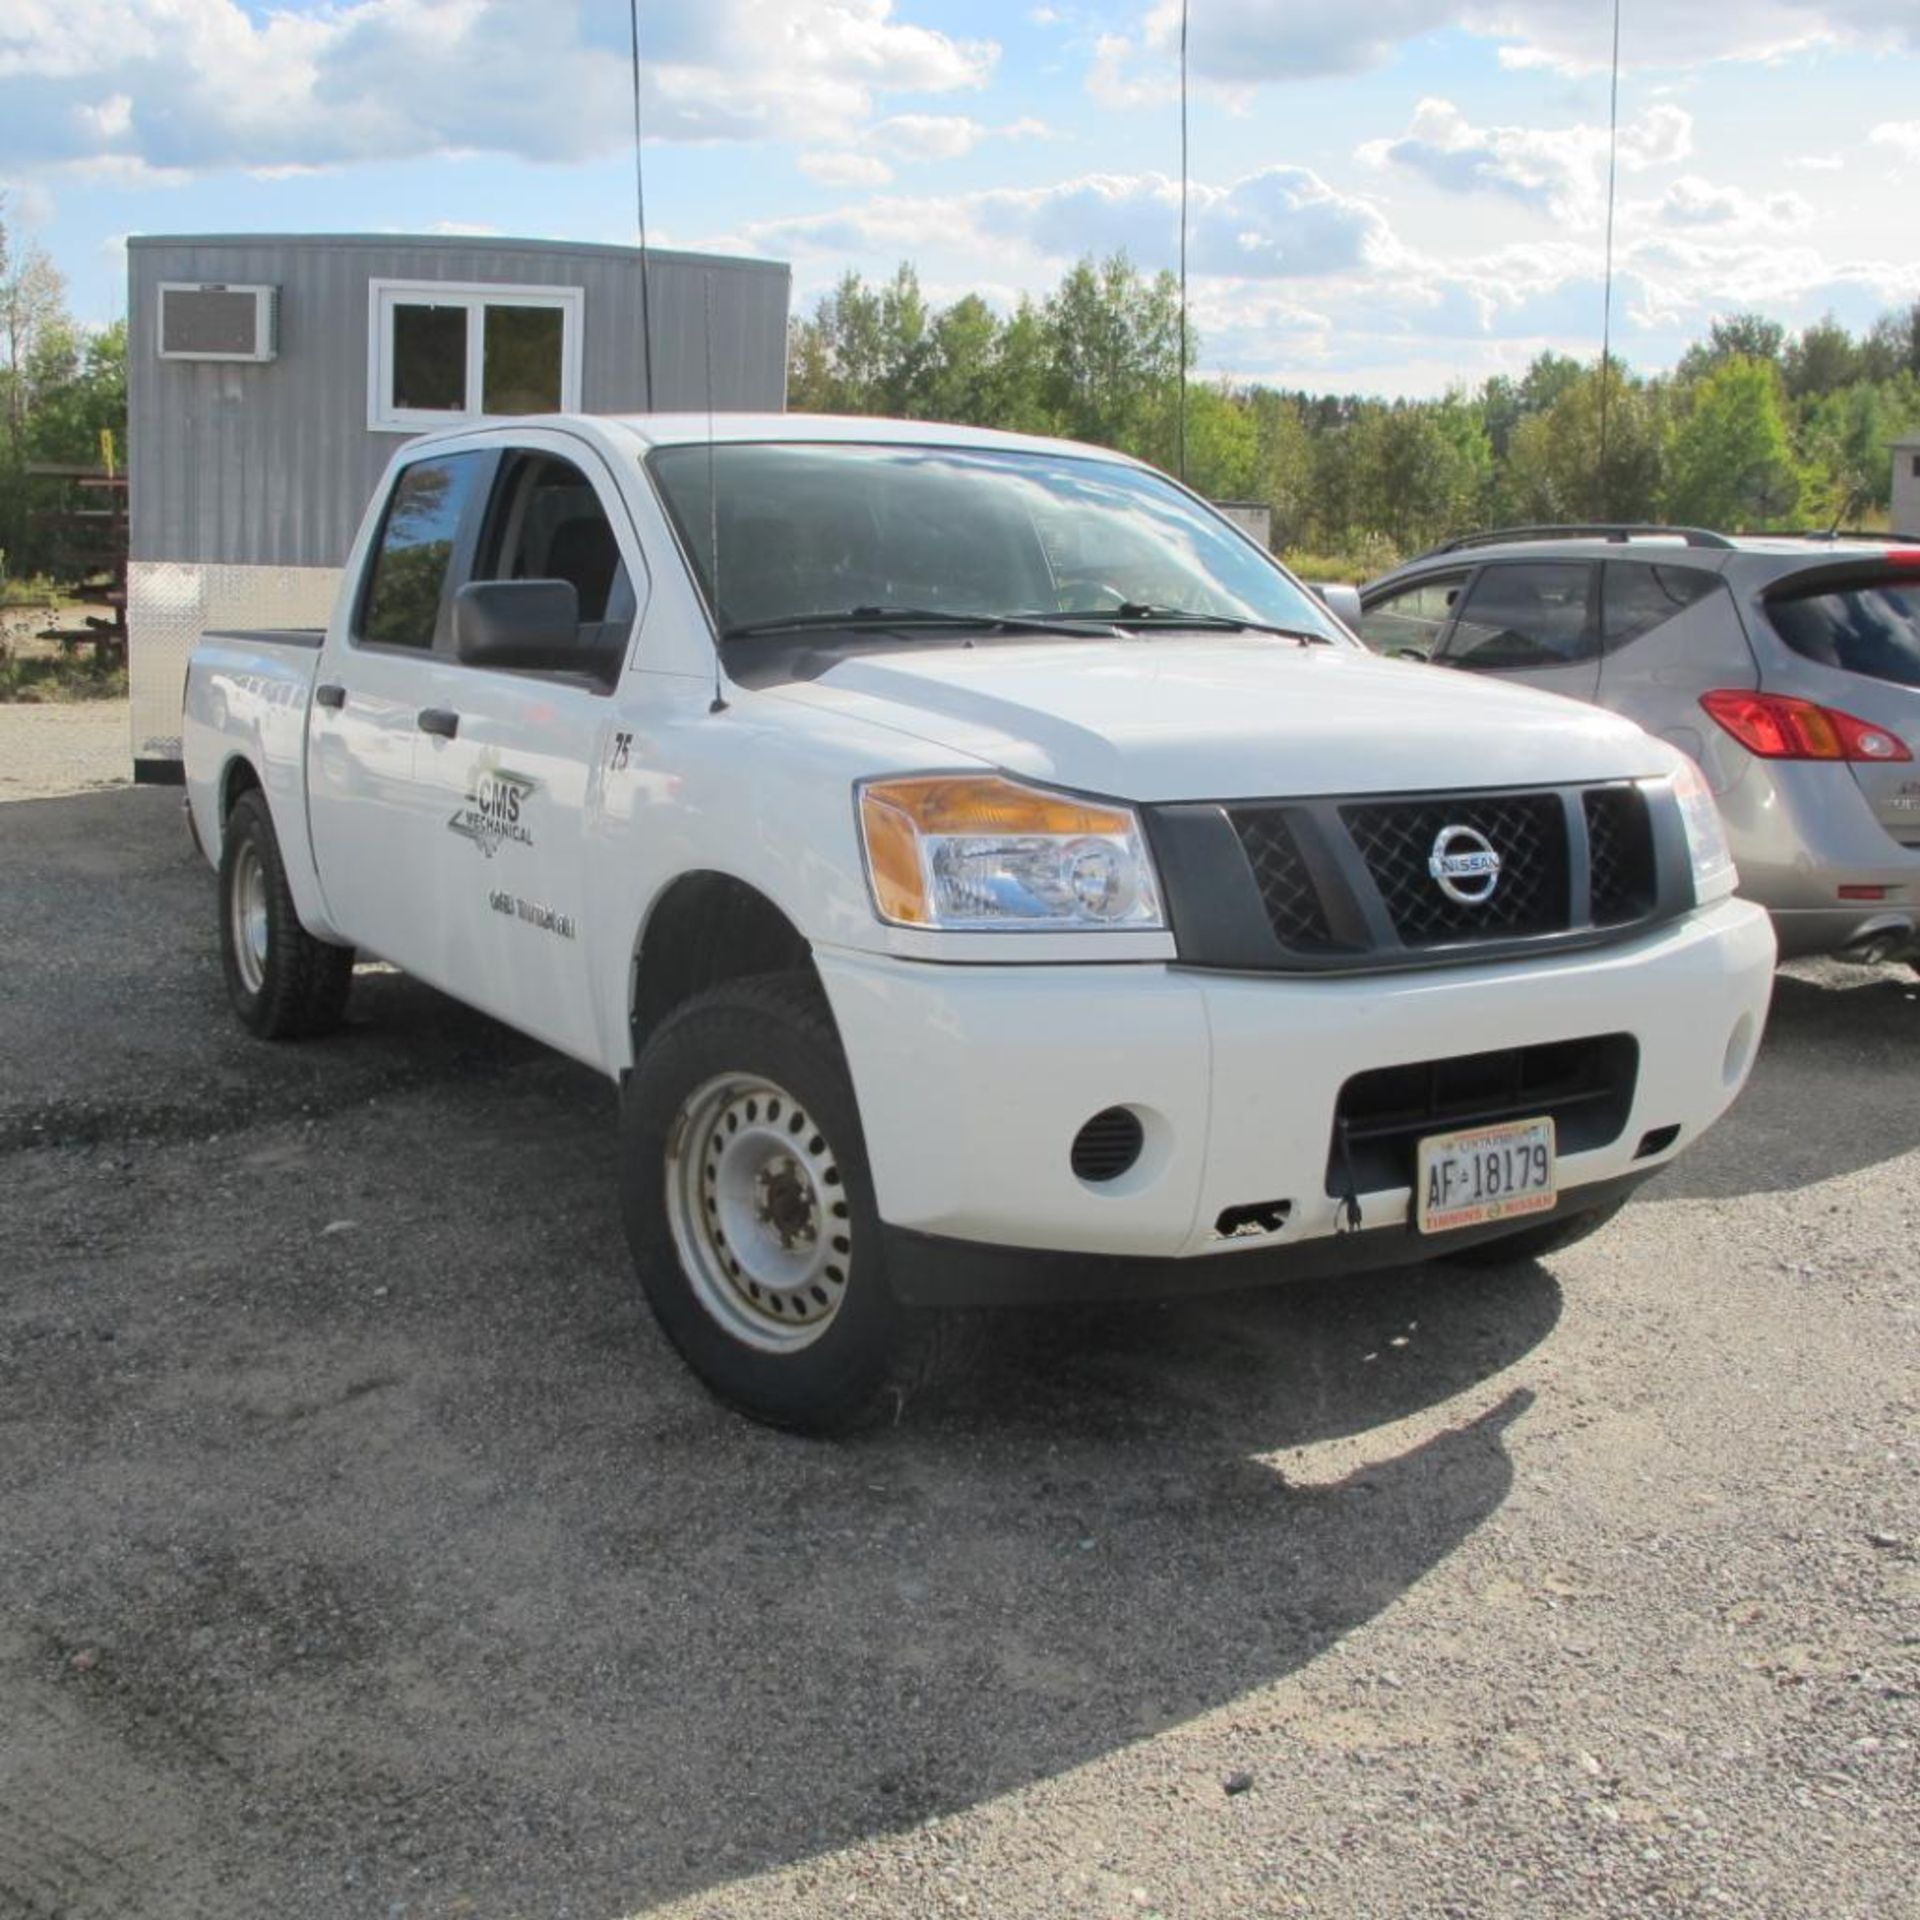 2013 NISSAN TITAN CREW CAB, 92574 KM INDICATED, 4X4, 5.6L, V-8, INCLUDES SUMMER TIRES ON RIMS, 1N6AA - Image 3 of 13